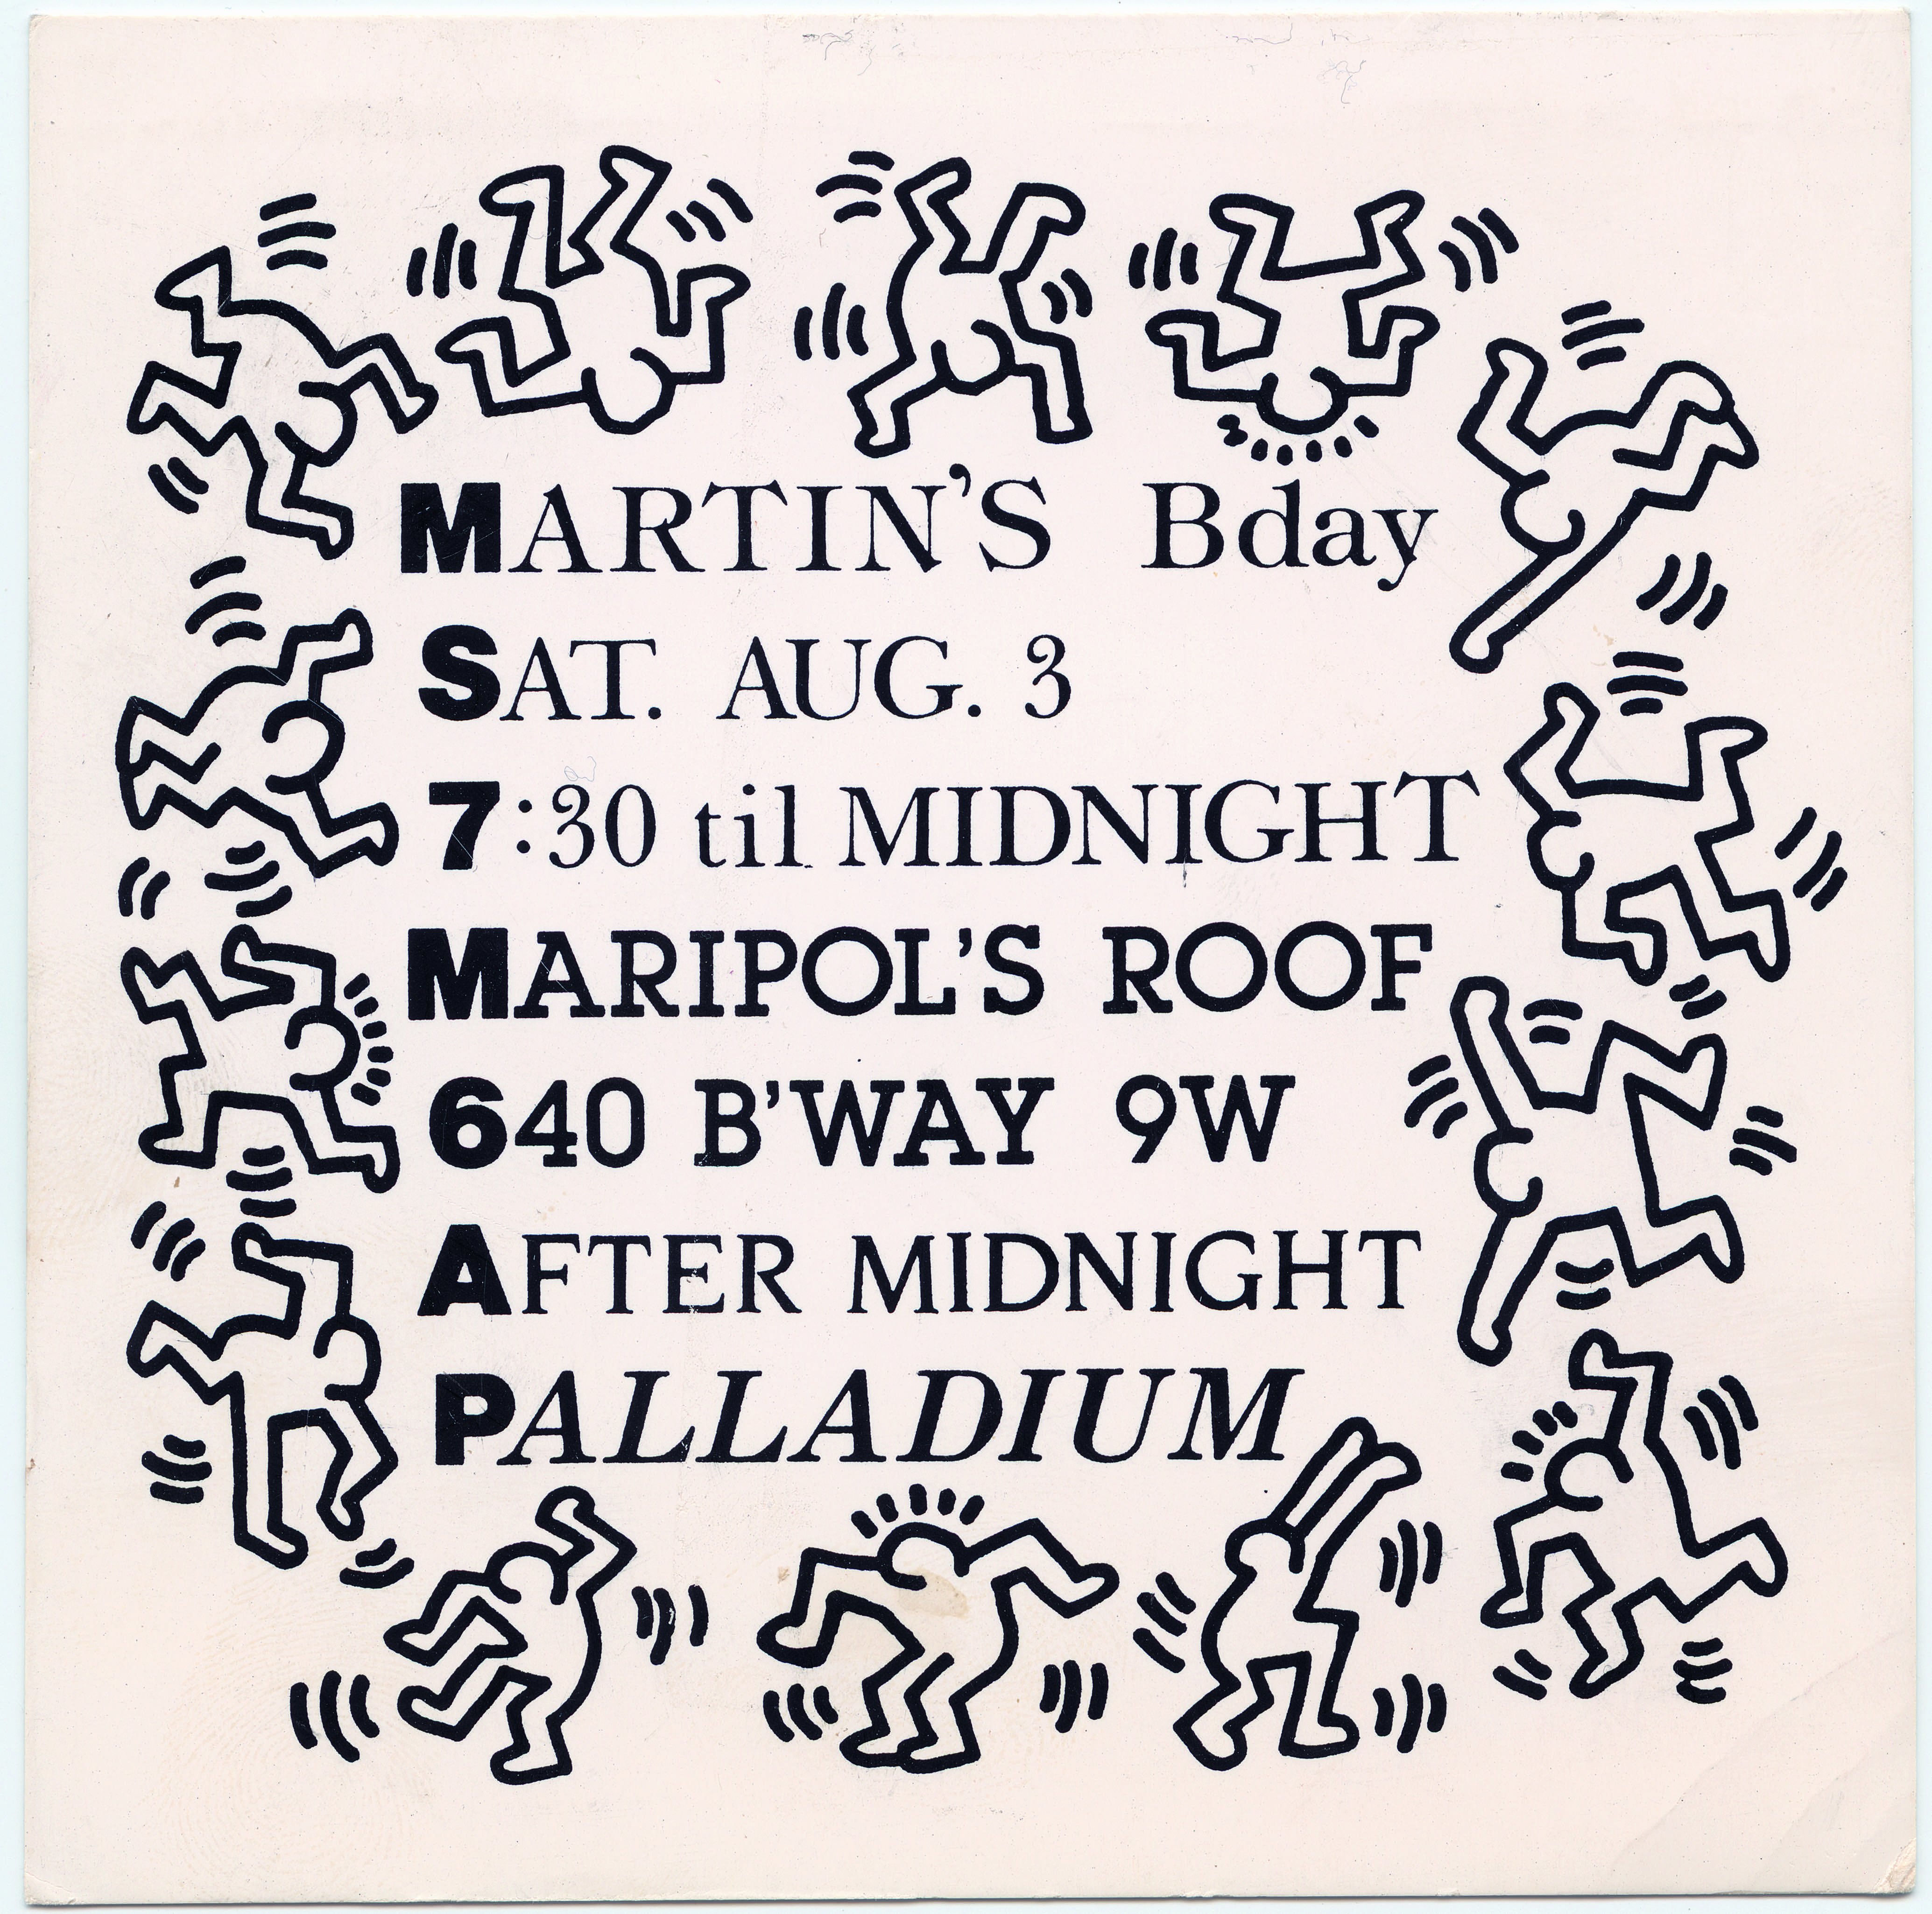  INVITATION DESIGNED BY KEITH HARING